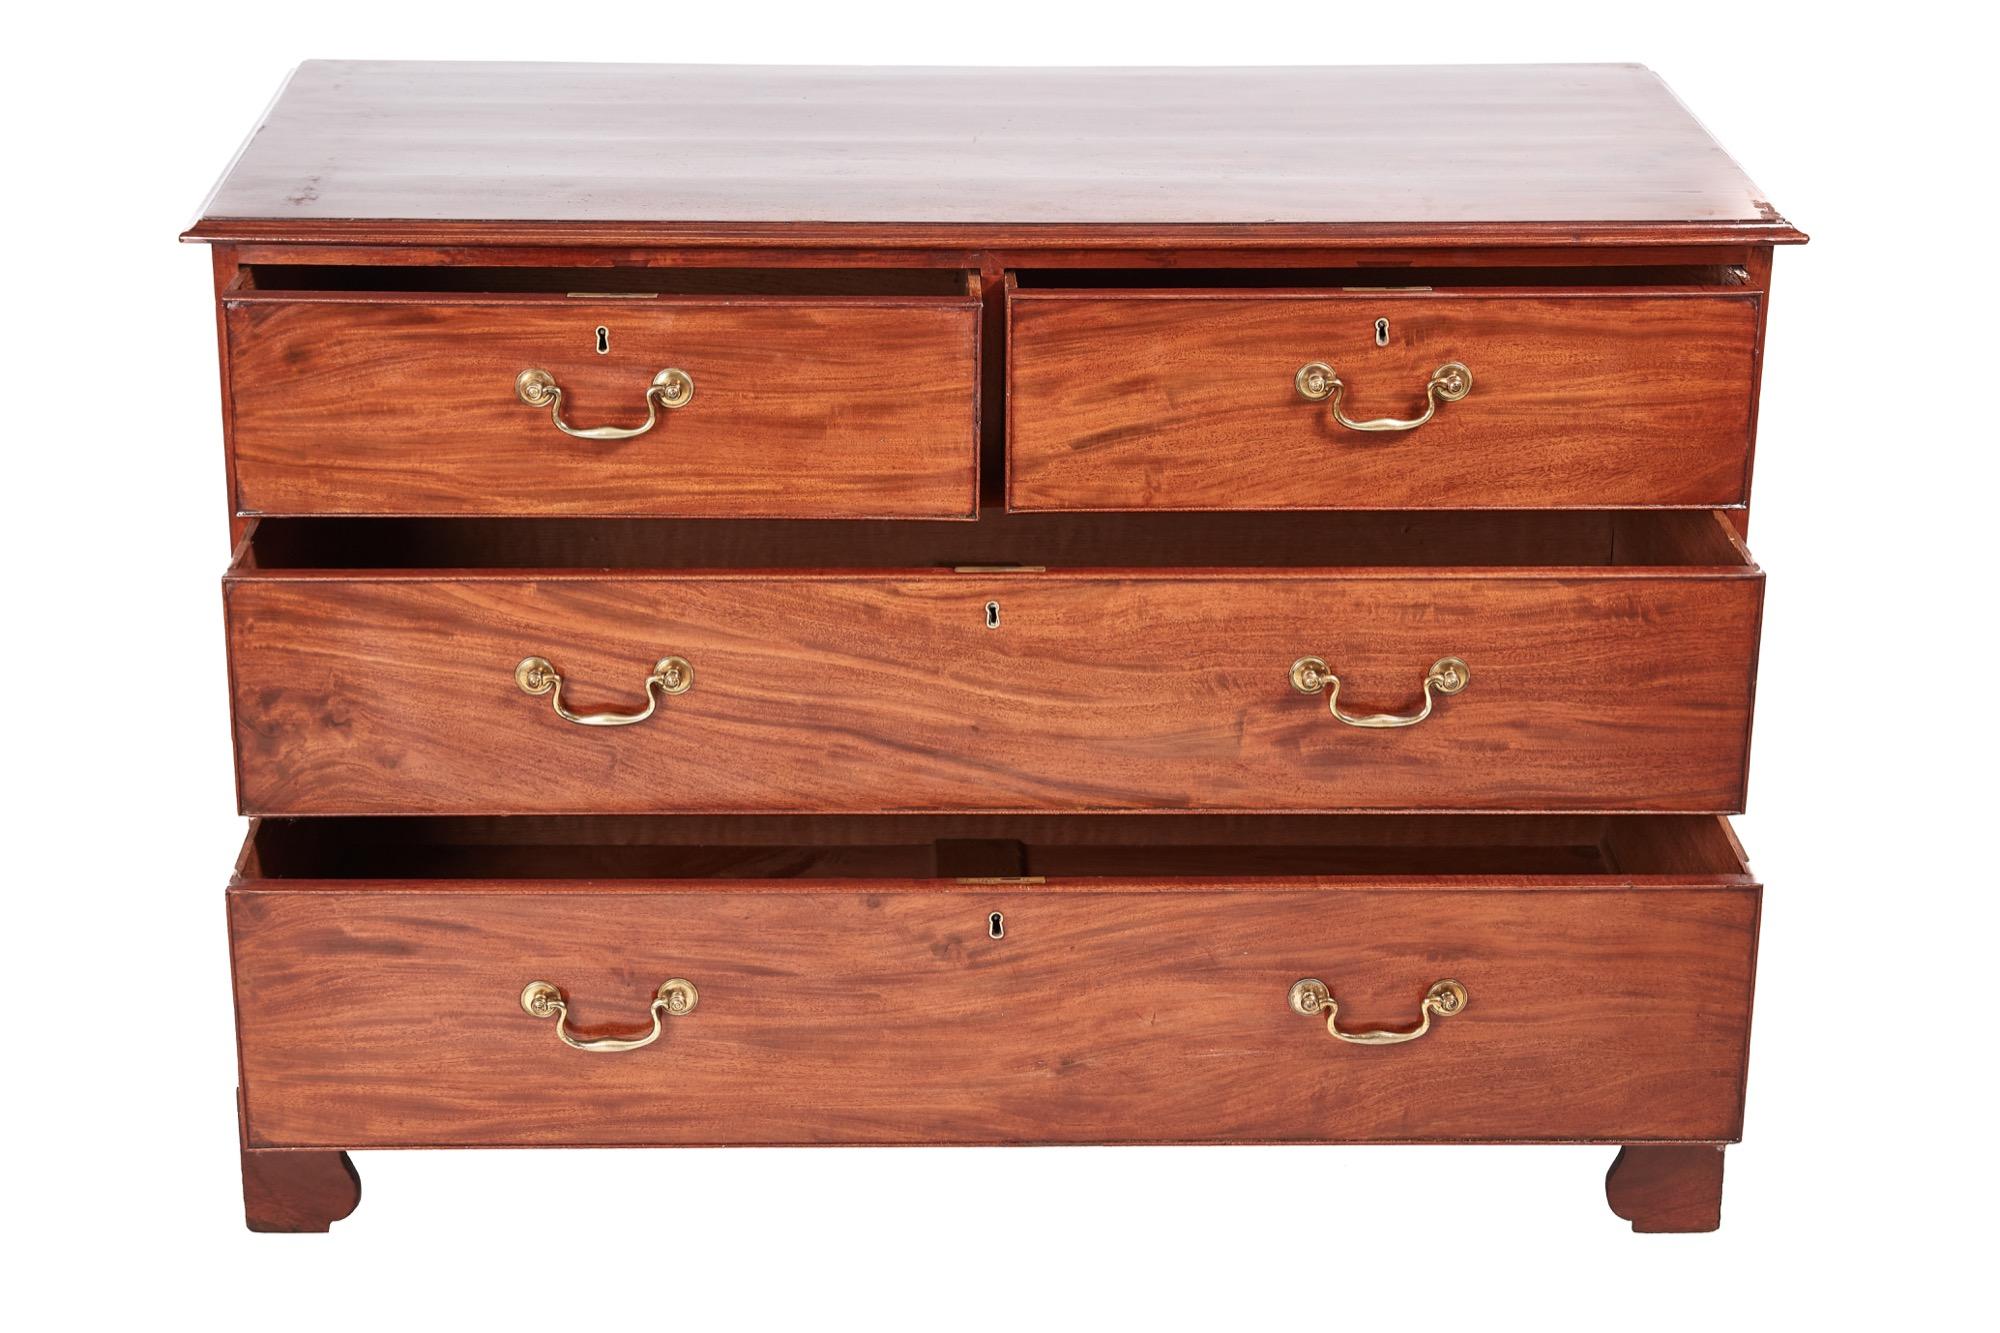 George III mahogany chest of drawers, with a lovely solid mahogany top, two short and two long all with original brass swan-neck handles, standing on original bracket feet
Lovely color and condition.
Measures: 50